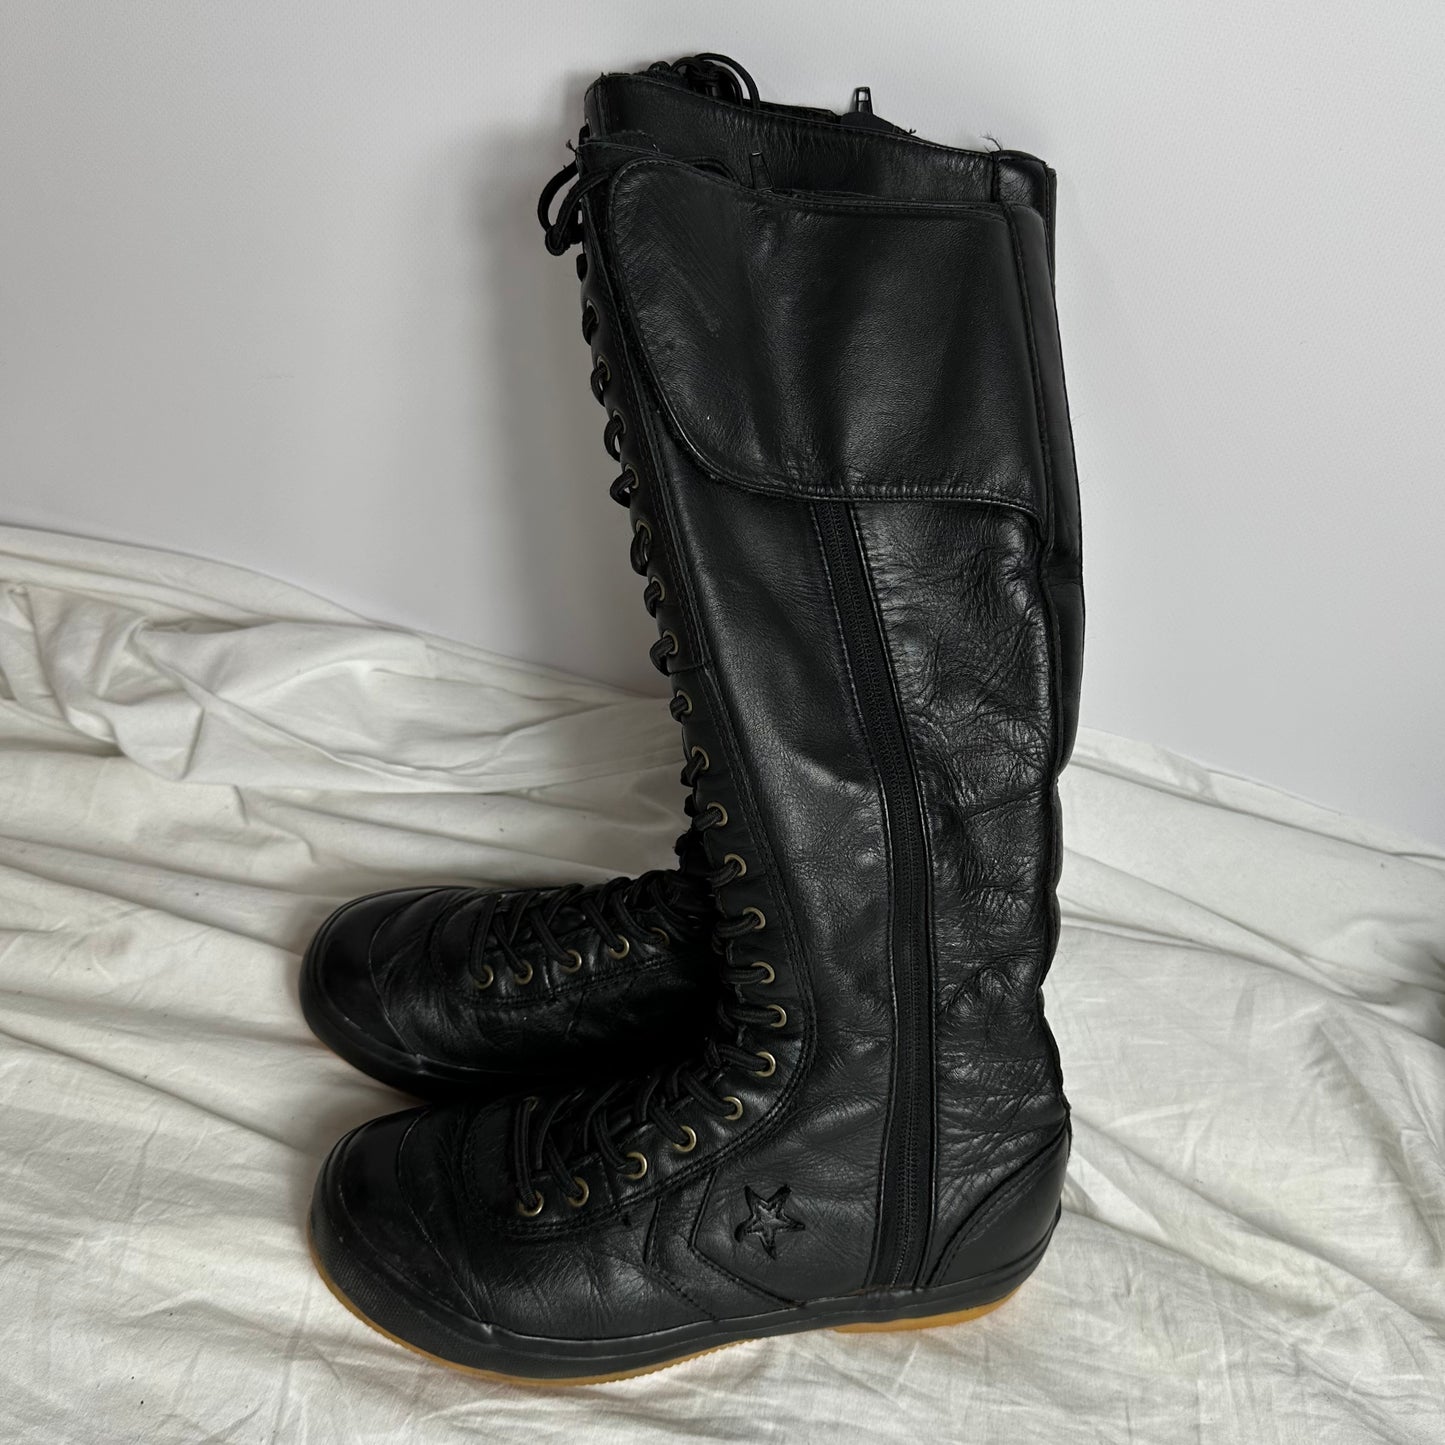 Converse Vintage Leather Lace Up Boots 35/36